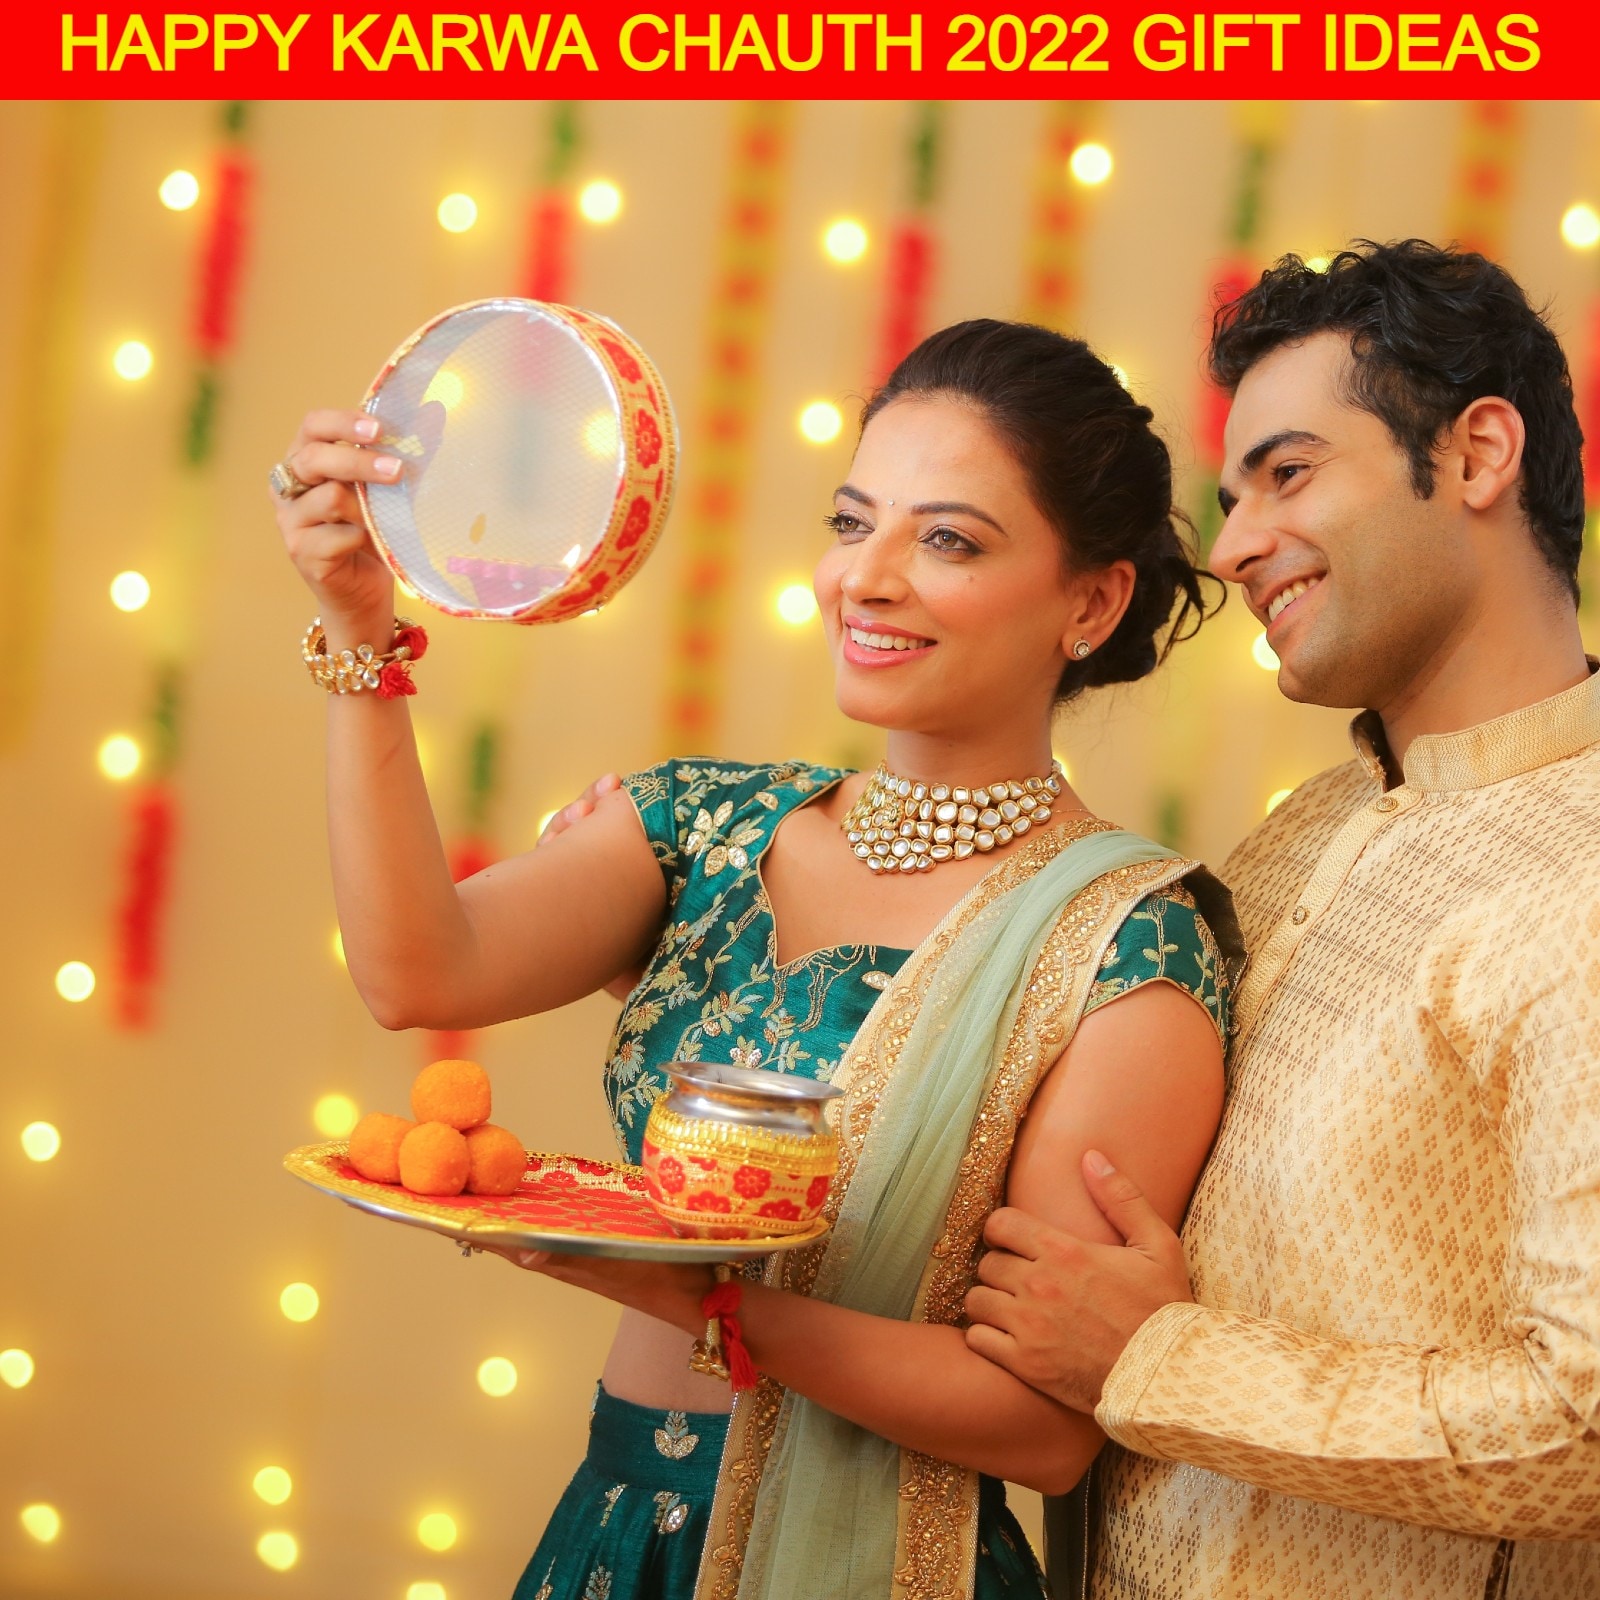 Karwa Chauth gift ideas 2022: 6 best gift ideas for your wife - Hindustan  Times